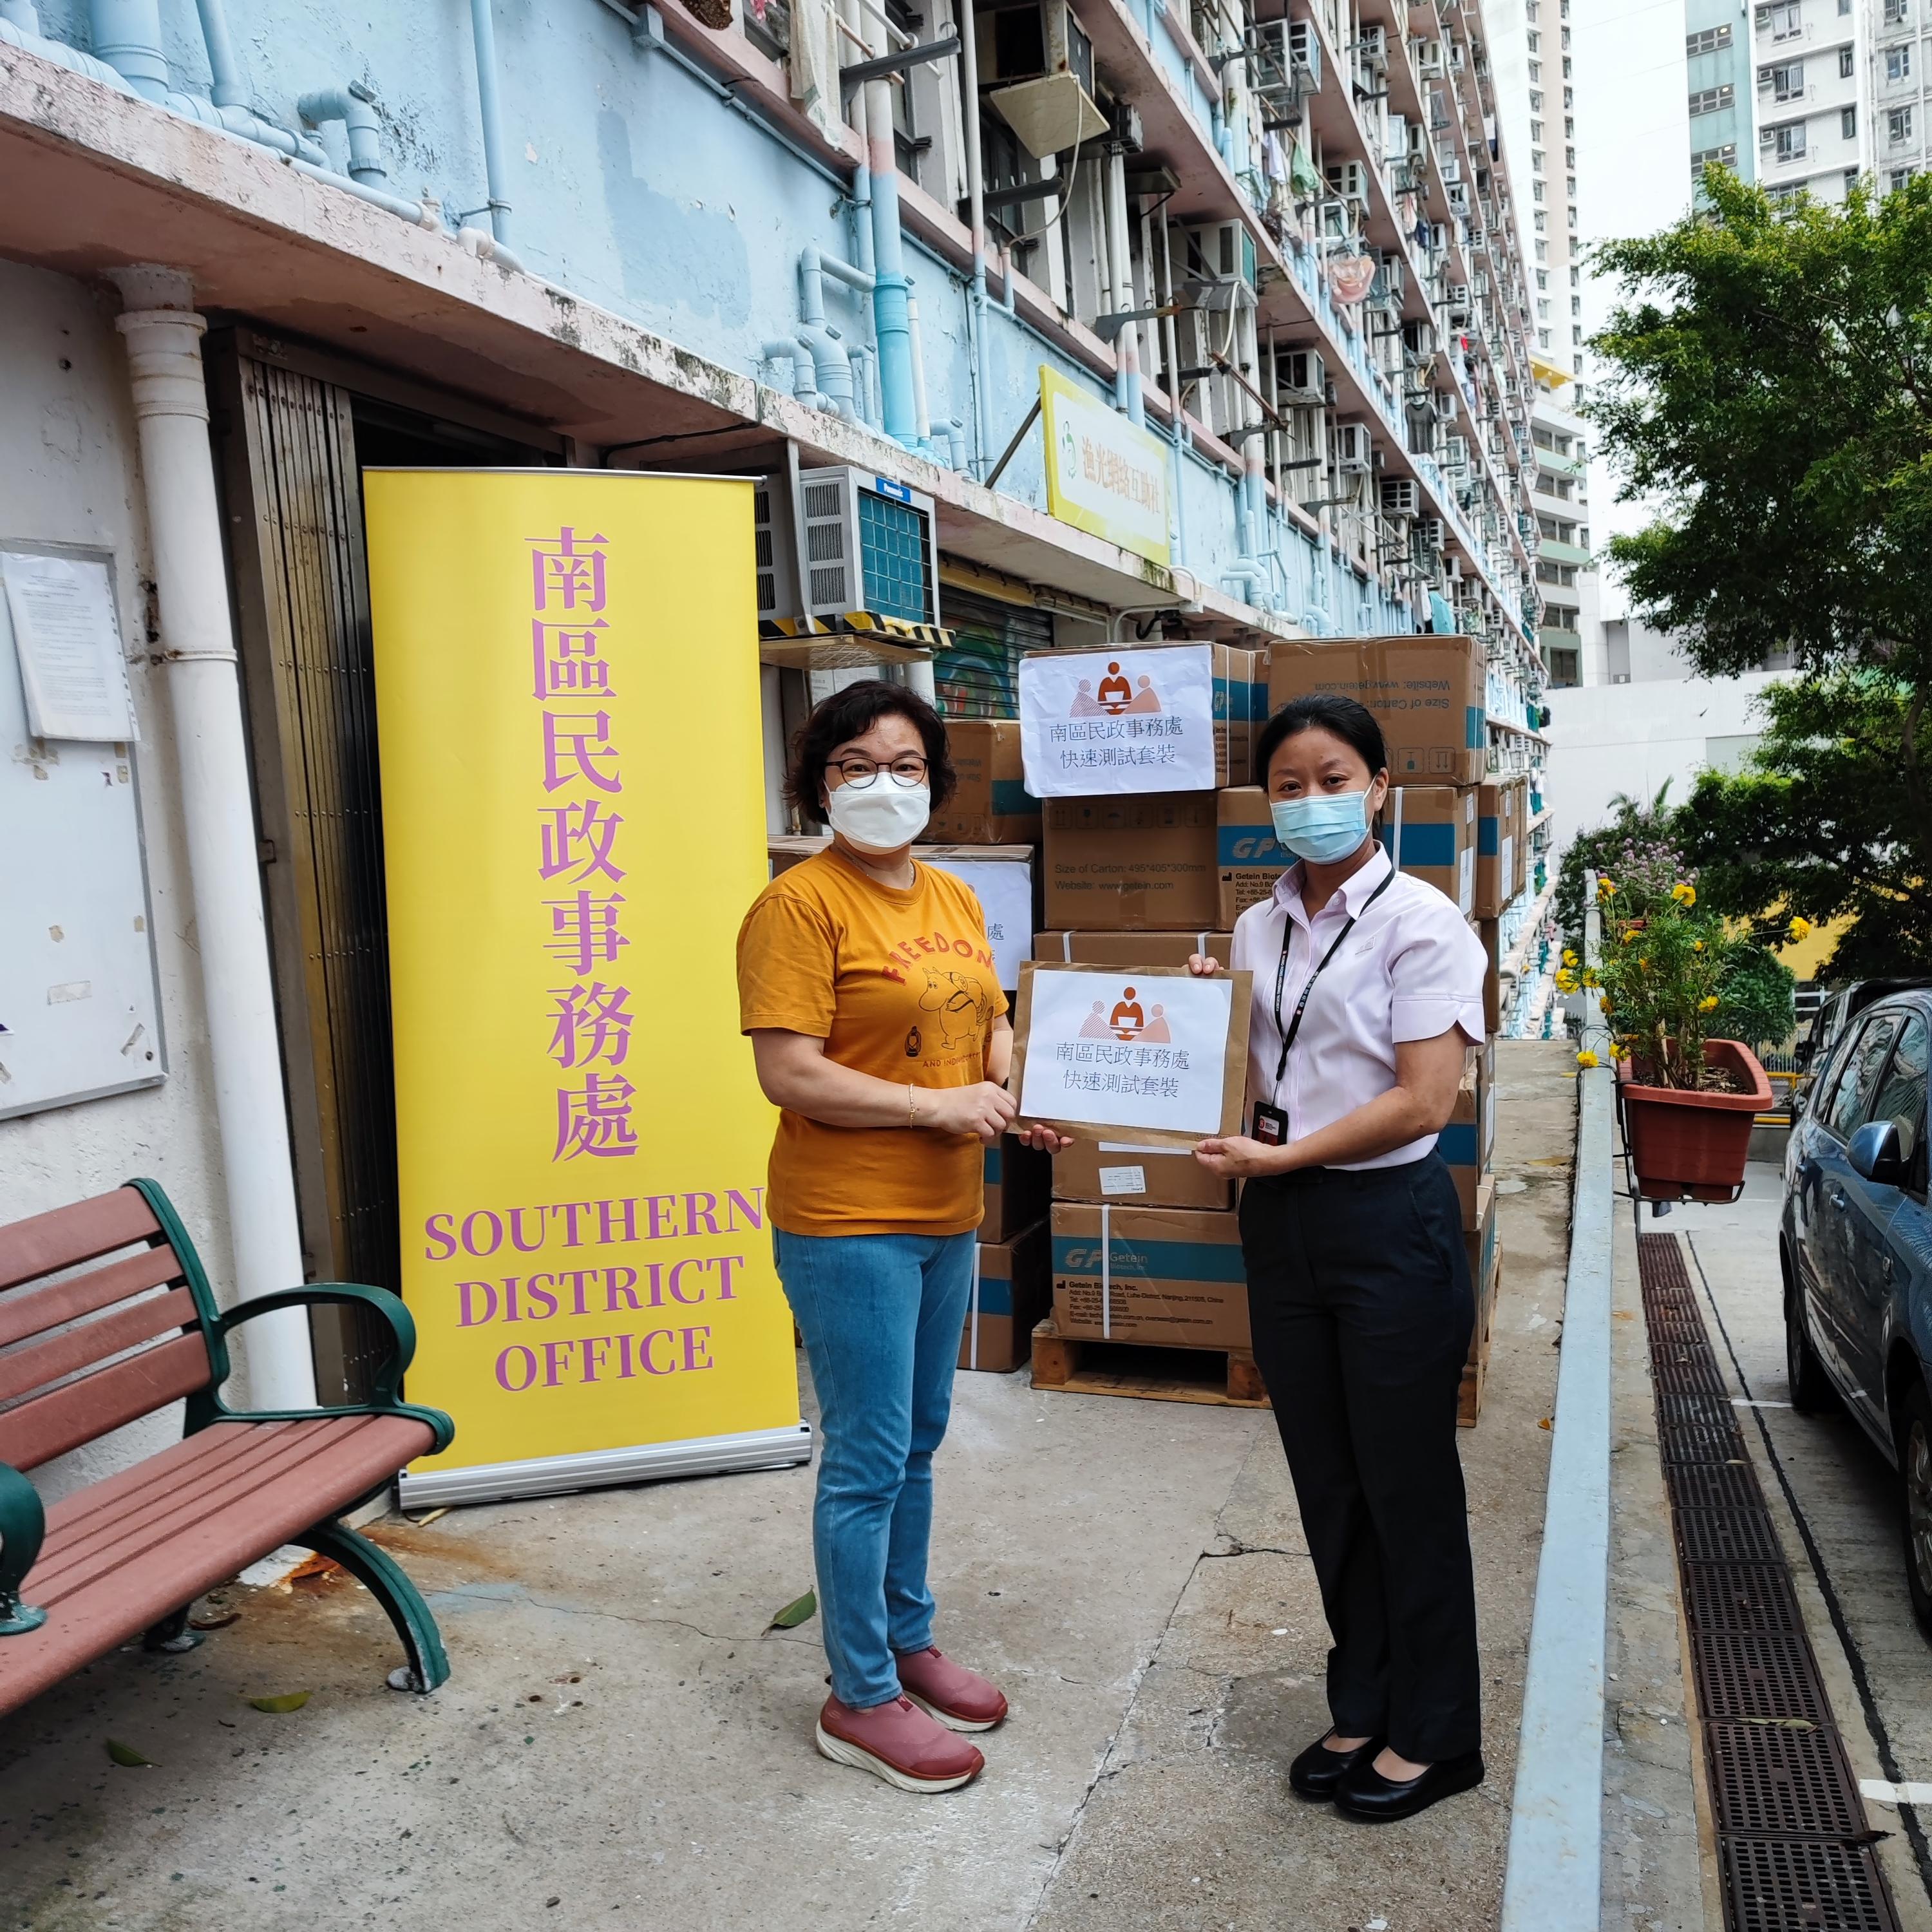 The Southern District Office today (July 4) distributed rapid test kits to households, cleansing workers and property management staff living and working in Yue Kwong Chuen for voluntary testing through the property management company.